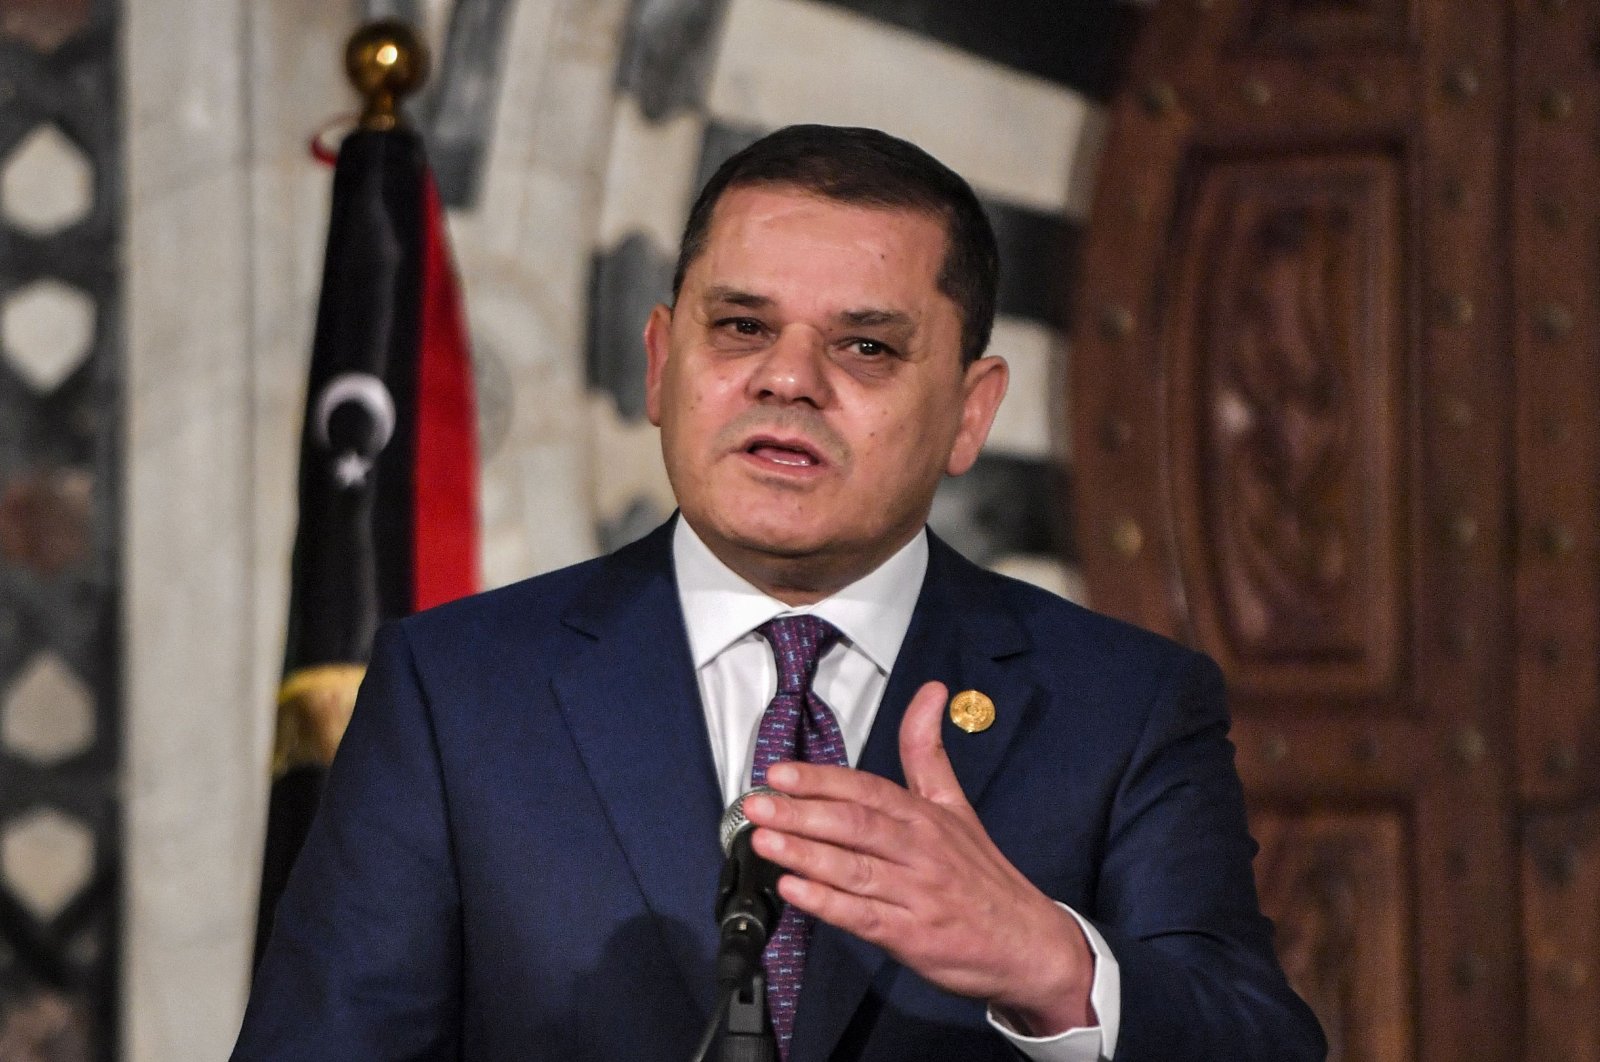 Libya&#039;s Tripoli-based Prime Minister Abdul Hamid Dbeibah gives a joint press conference with his Tunisian counterpart in Tunisia&#039;s capital Tunis, Nov. 30, 2022. (AFP Photo)